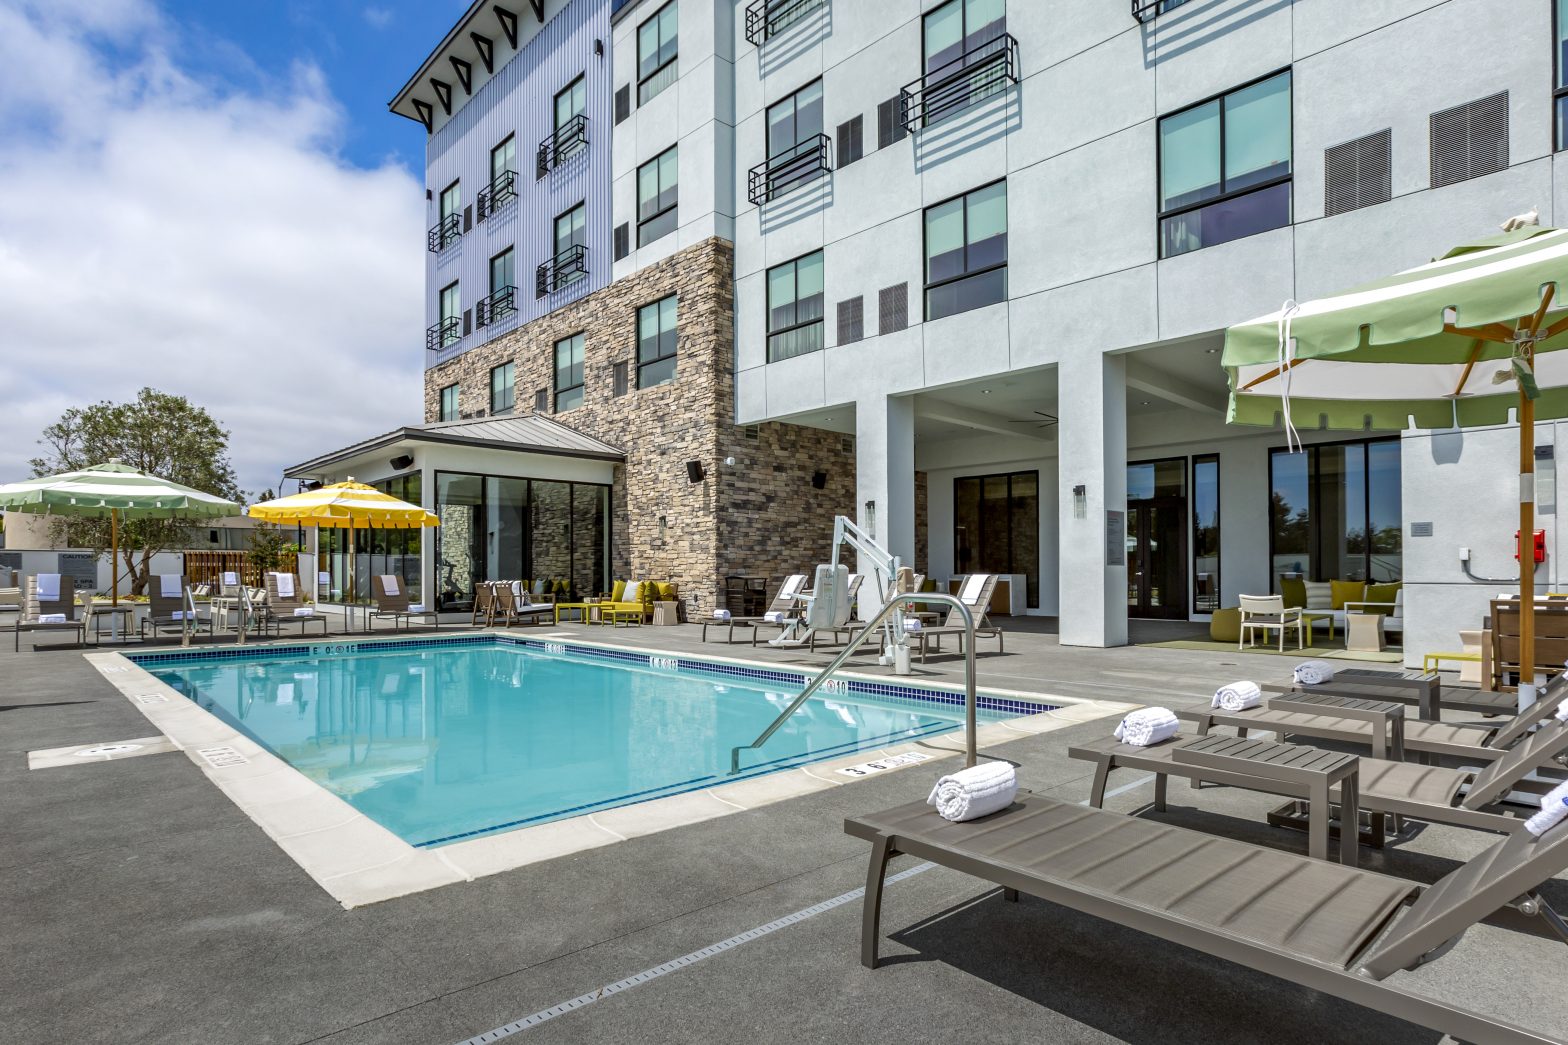 Cambria Hotel by Choice in Sonoma/Rohnert Park